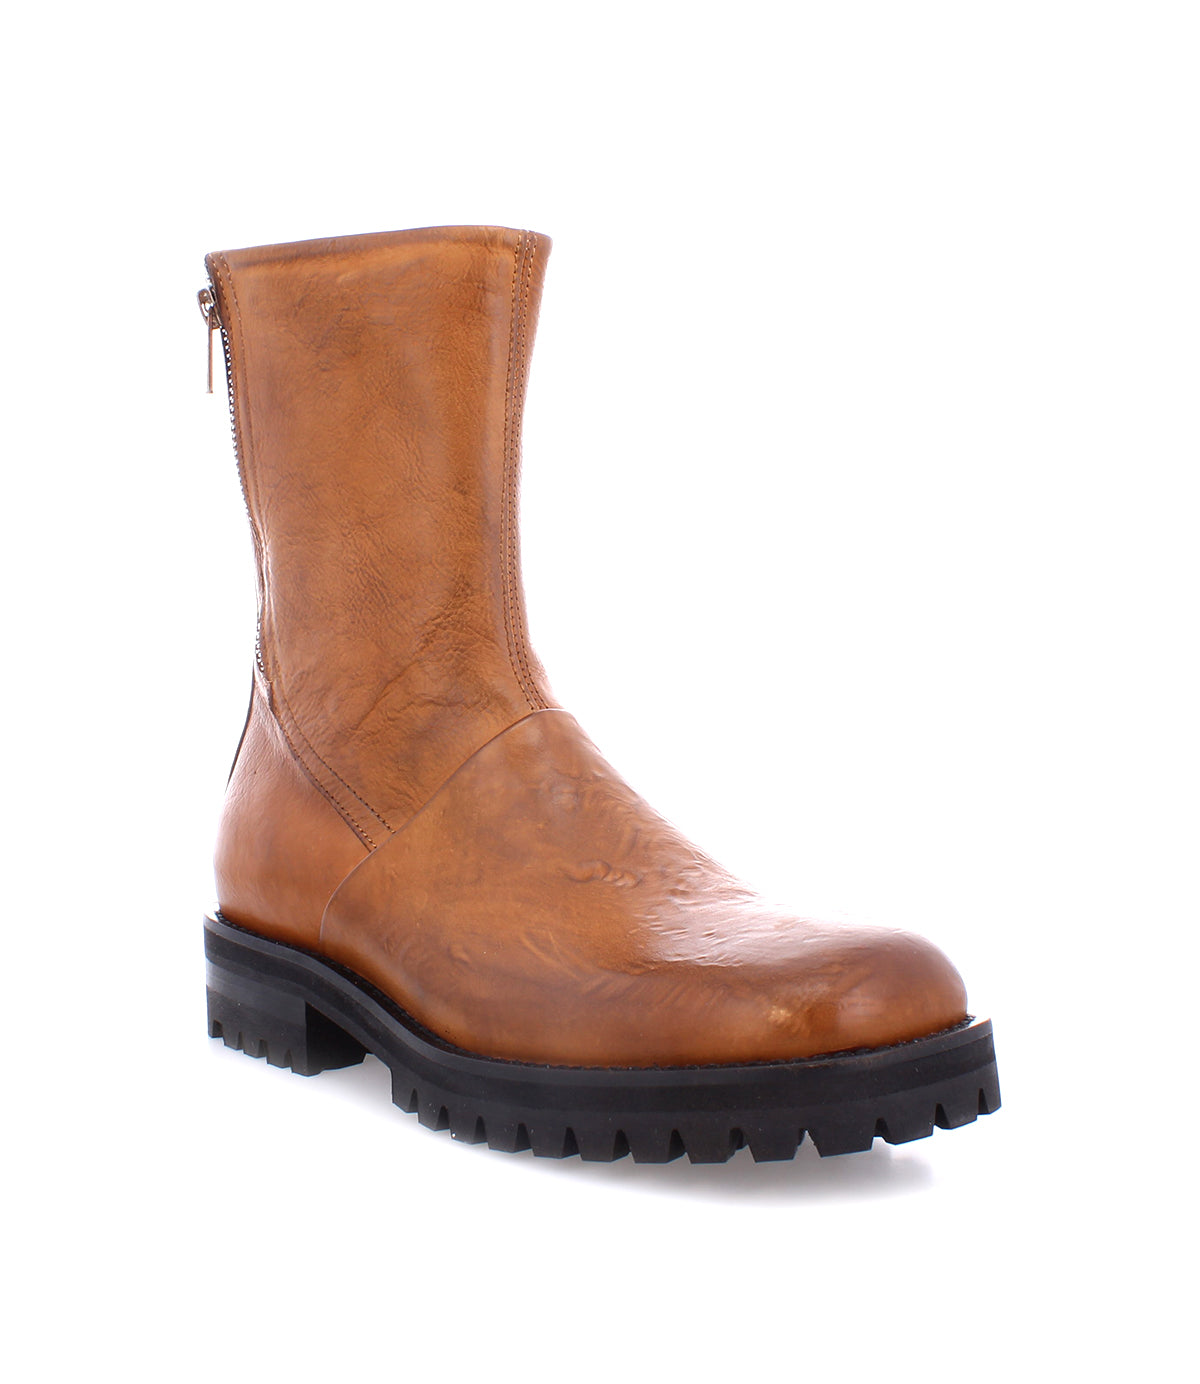 A Bed Stu Ploy, an Italian leather ankle boot with a convenient zipper on the side.